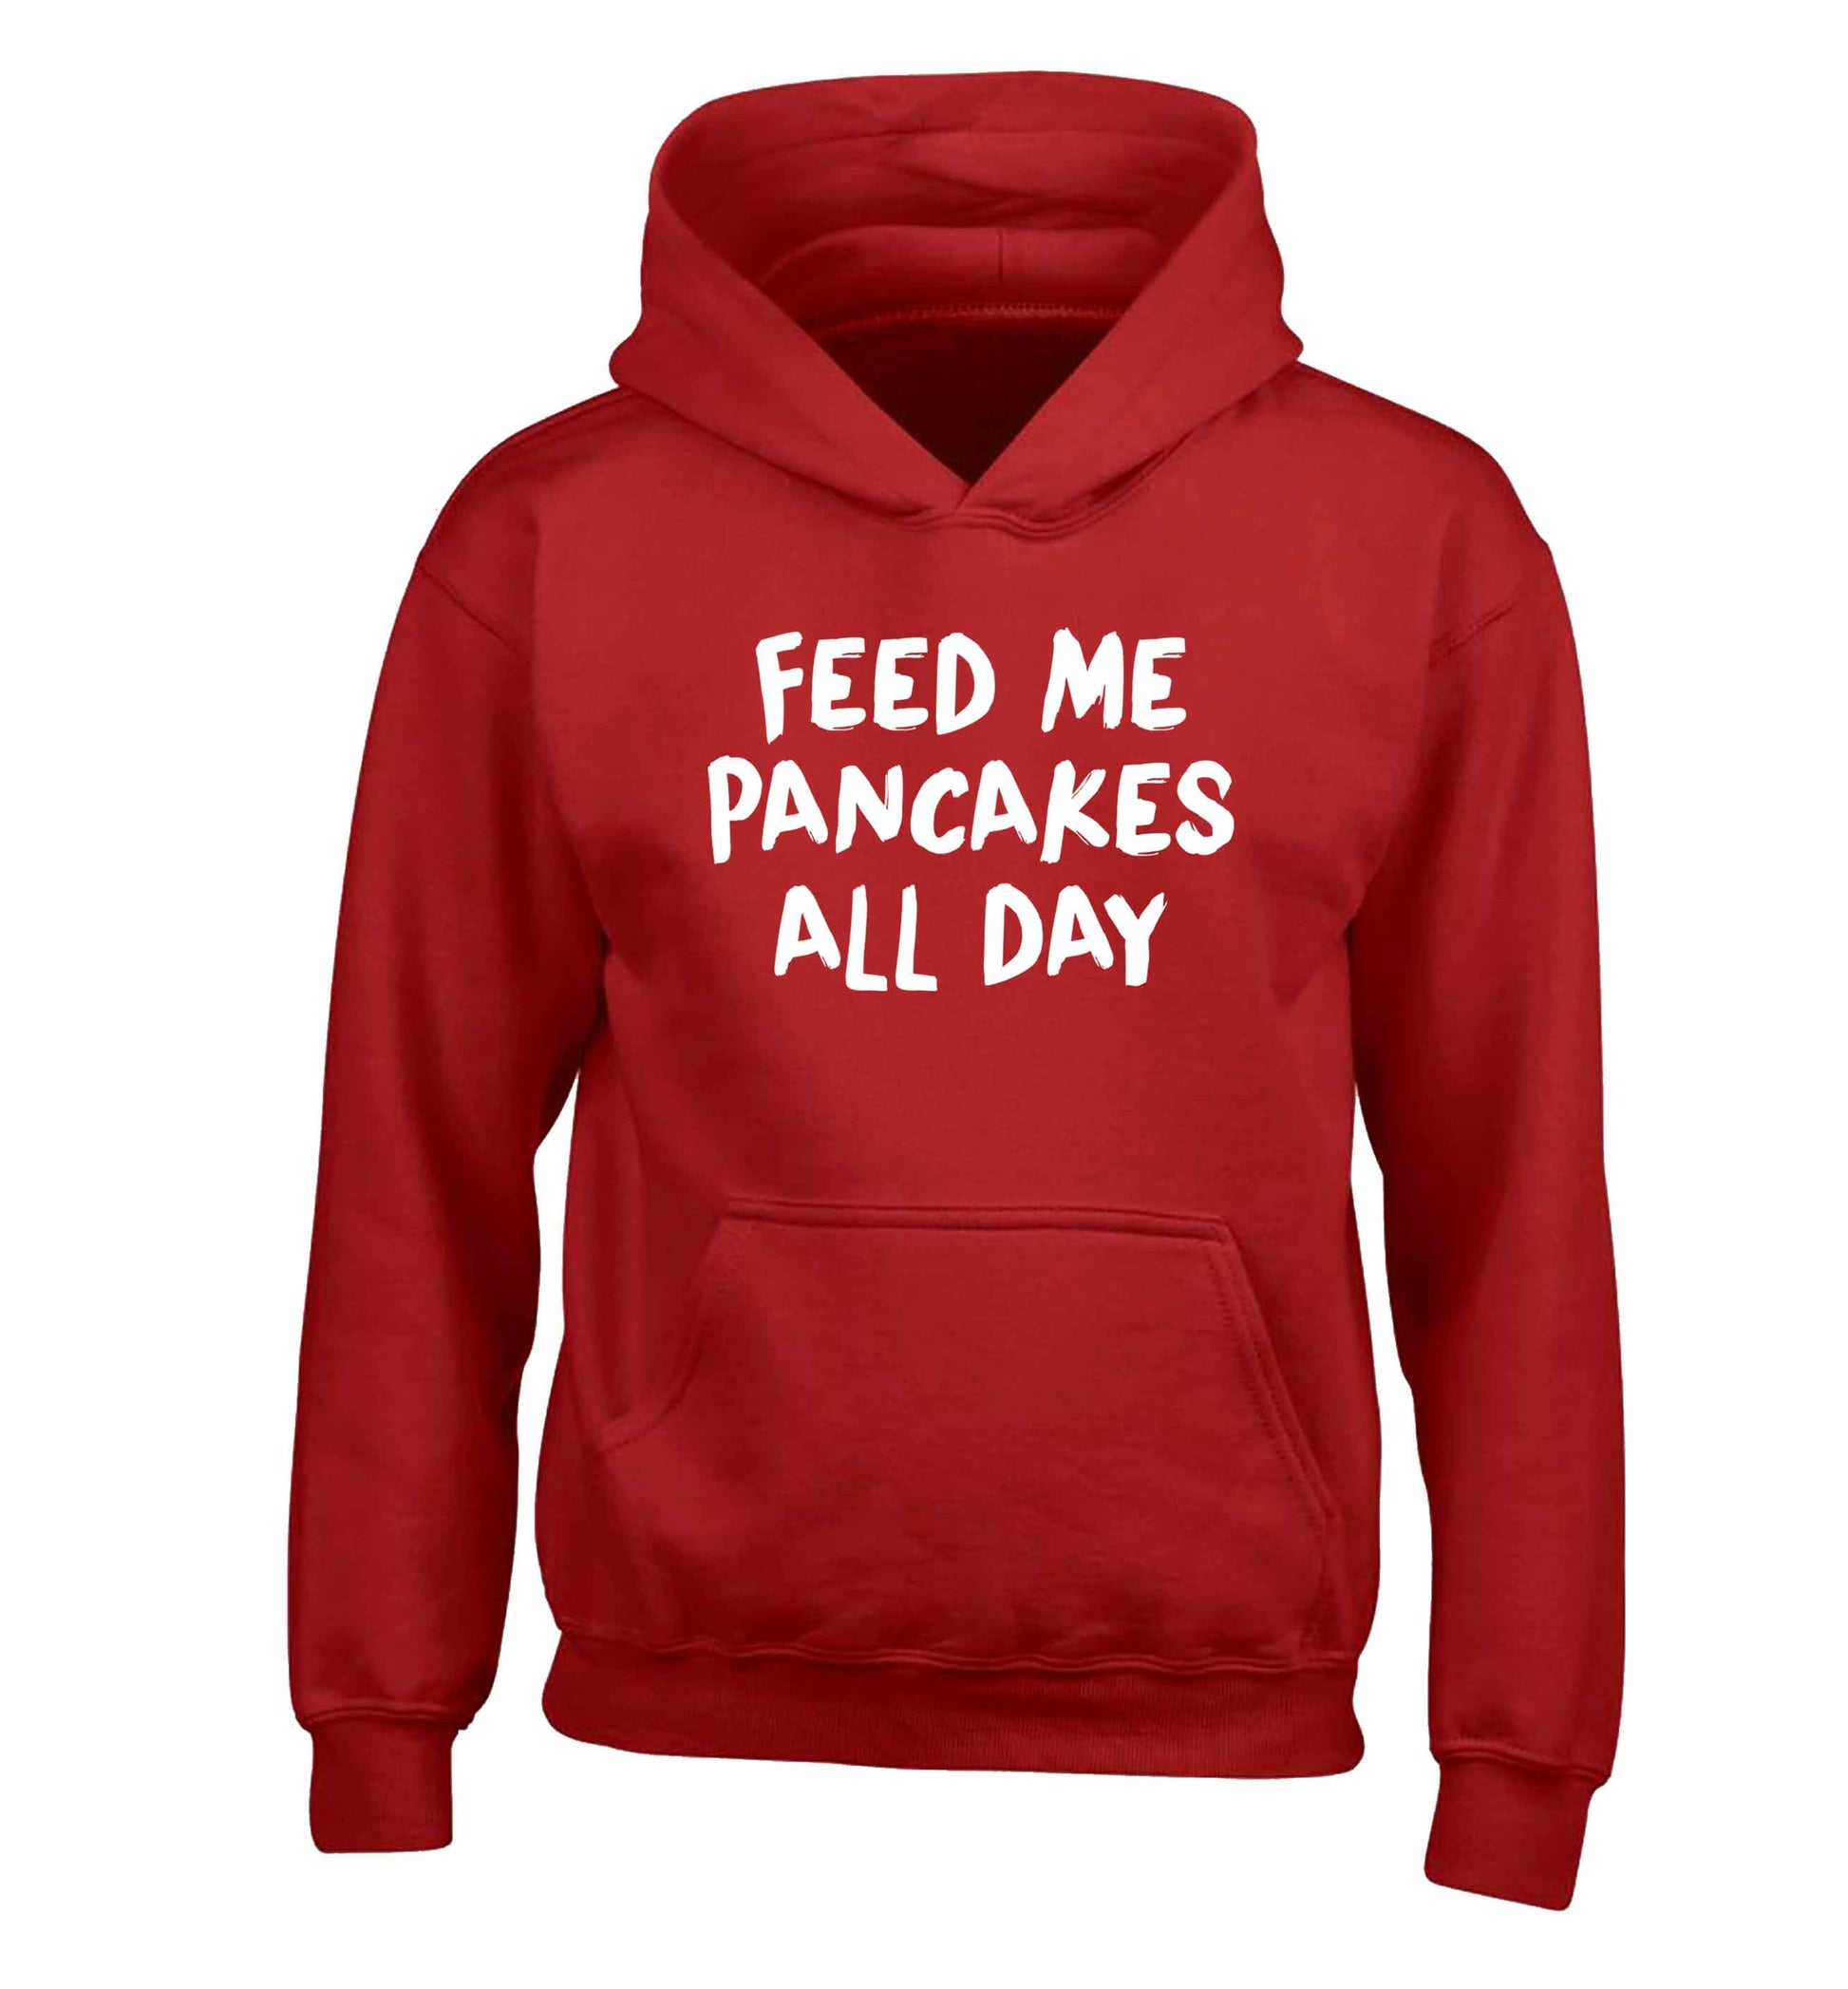 Feed me pancakes all day children's red hoodie 12-13 Years